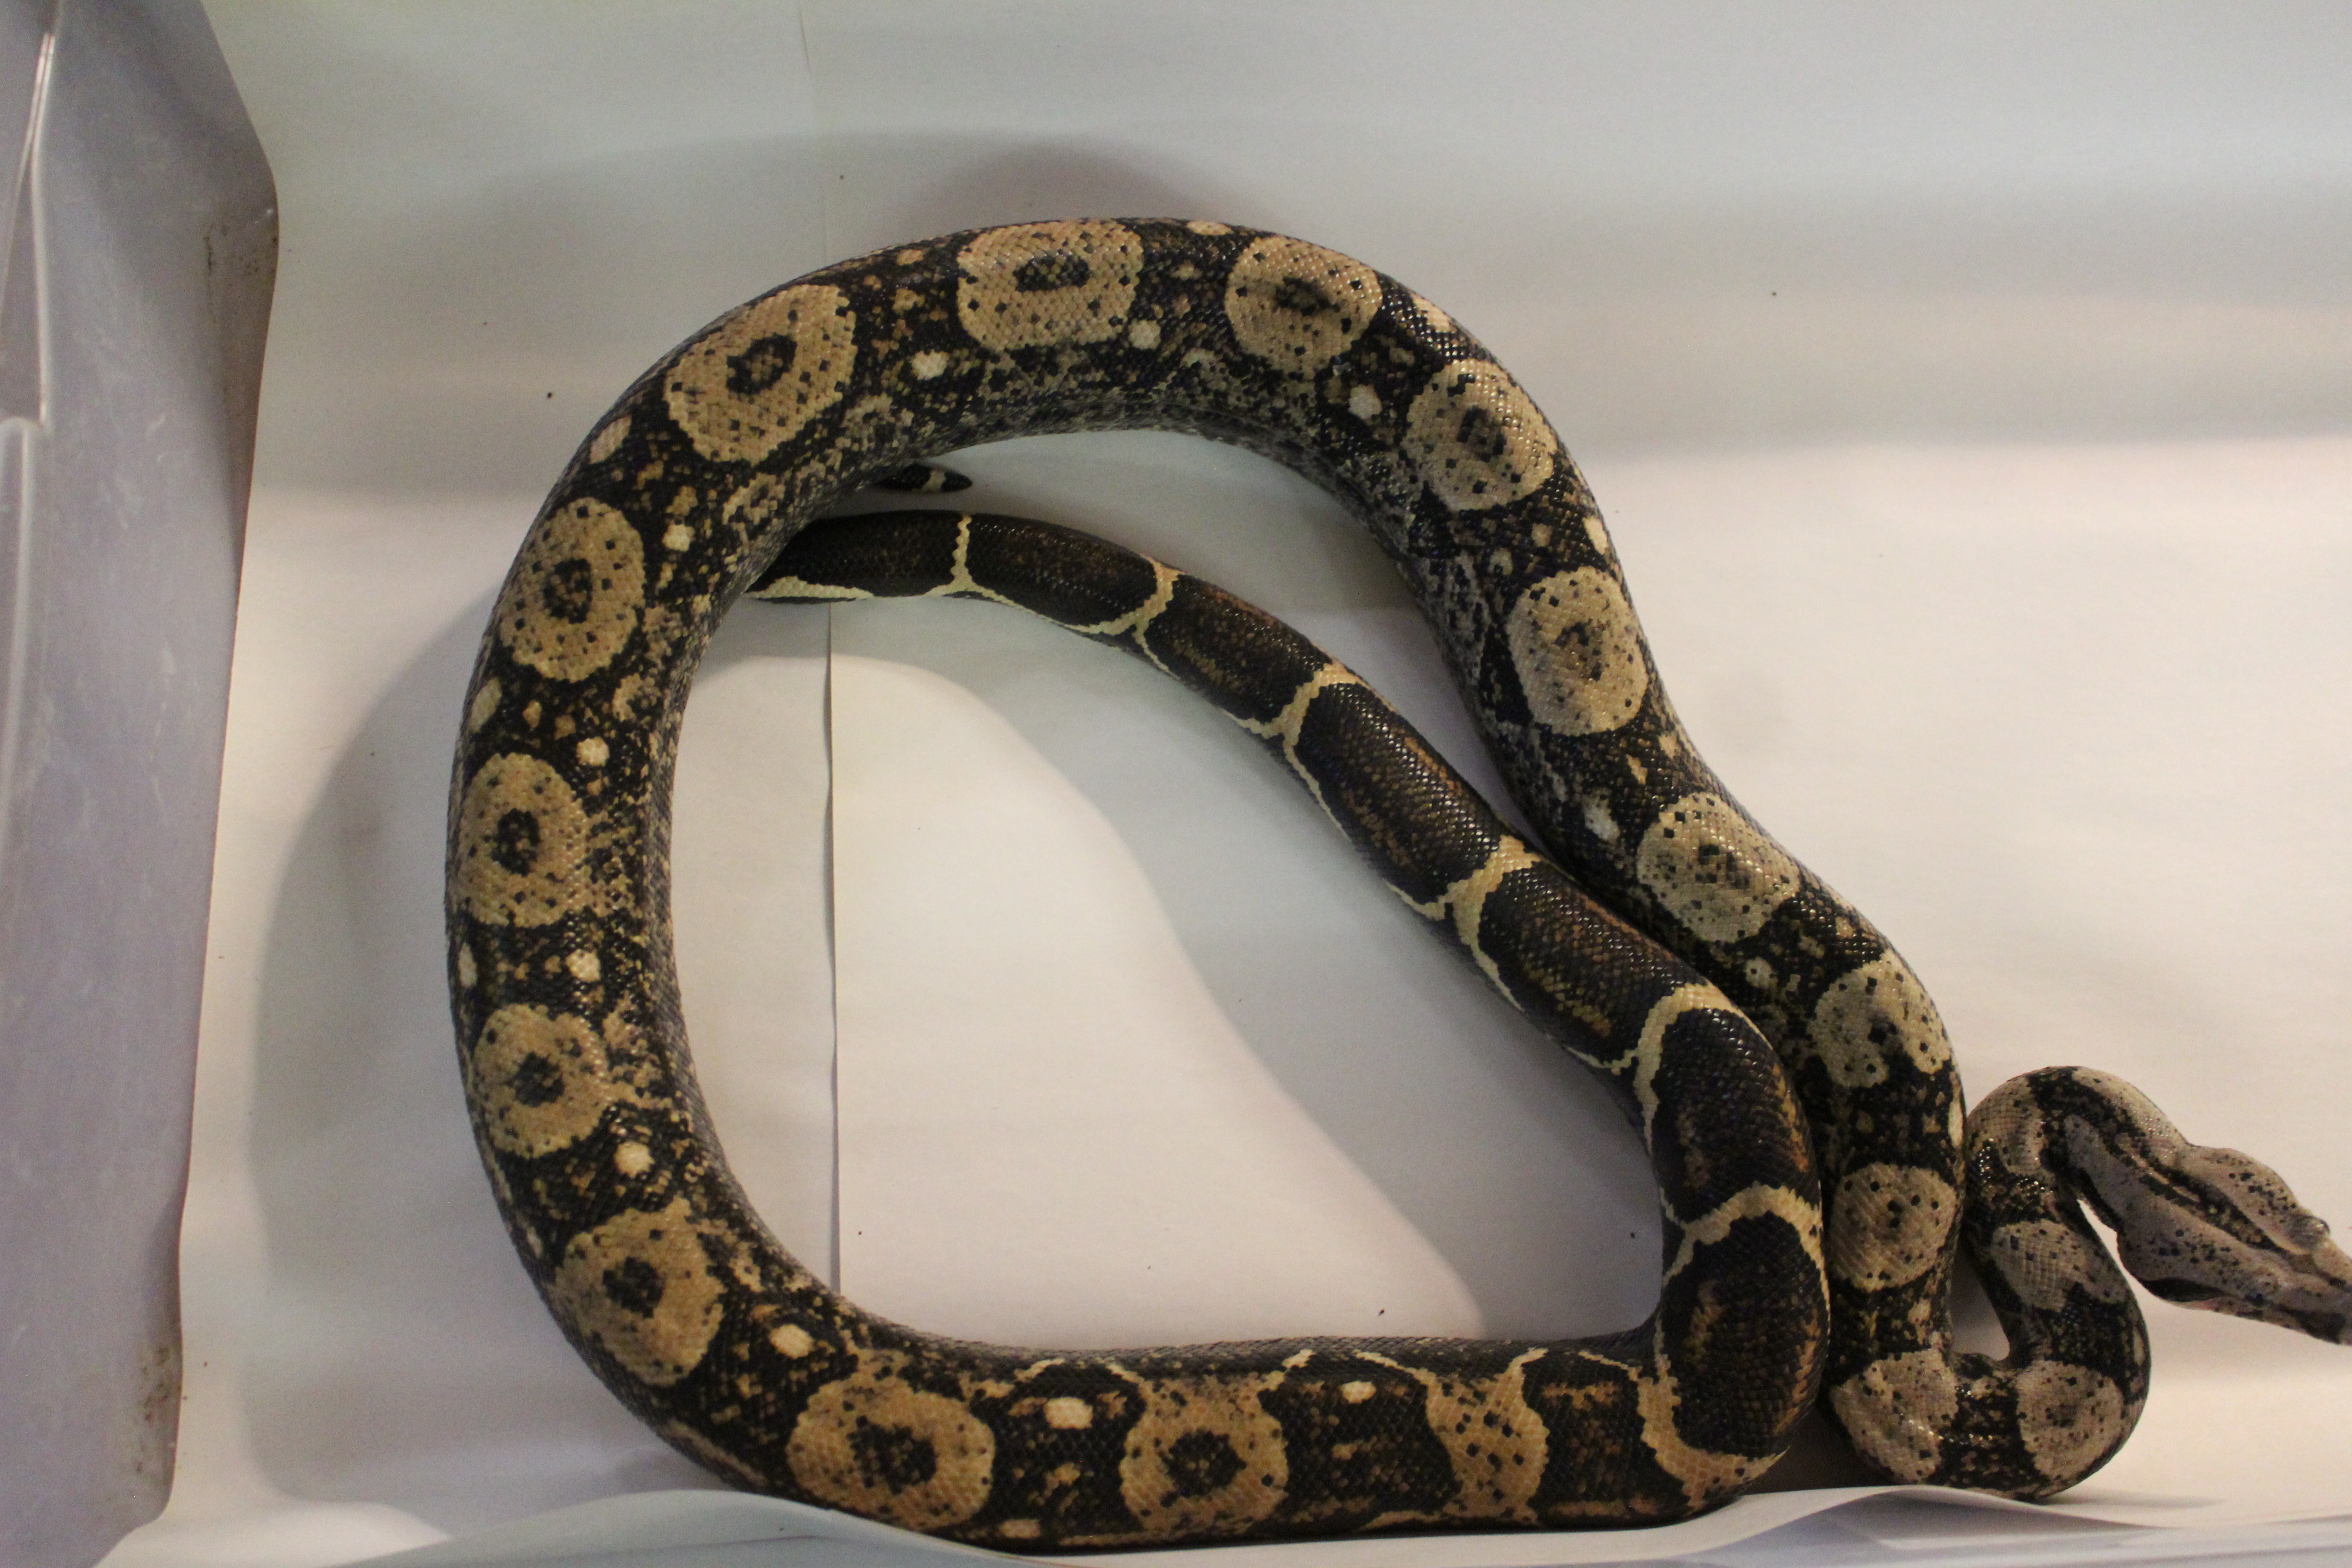 INCA Boa Constrictor by Springs Forked Tongue